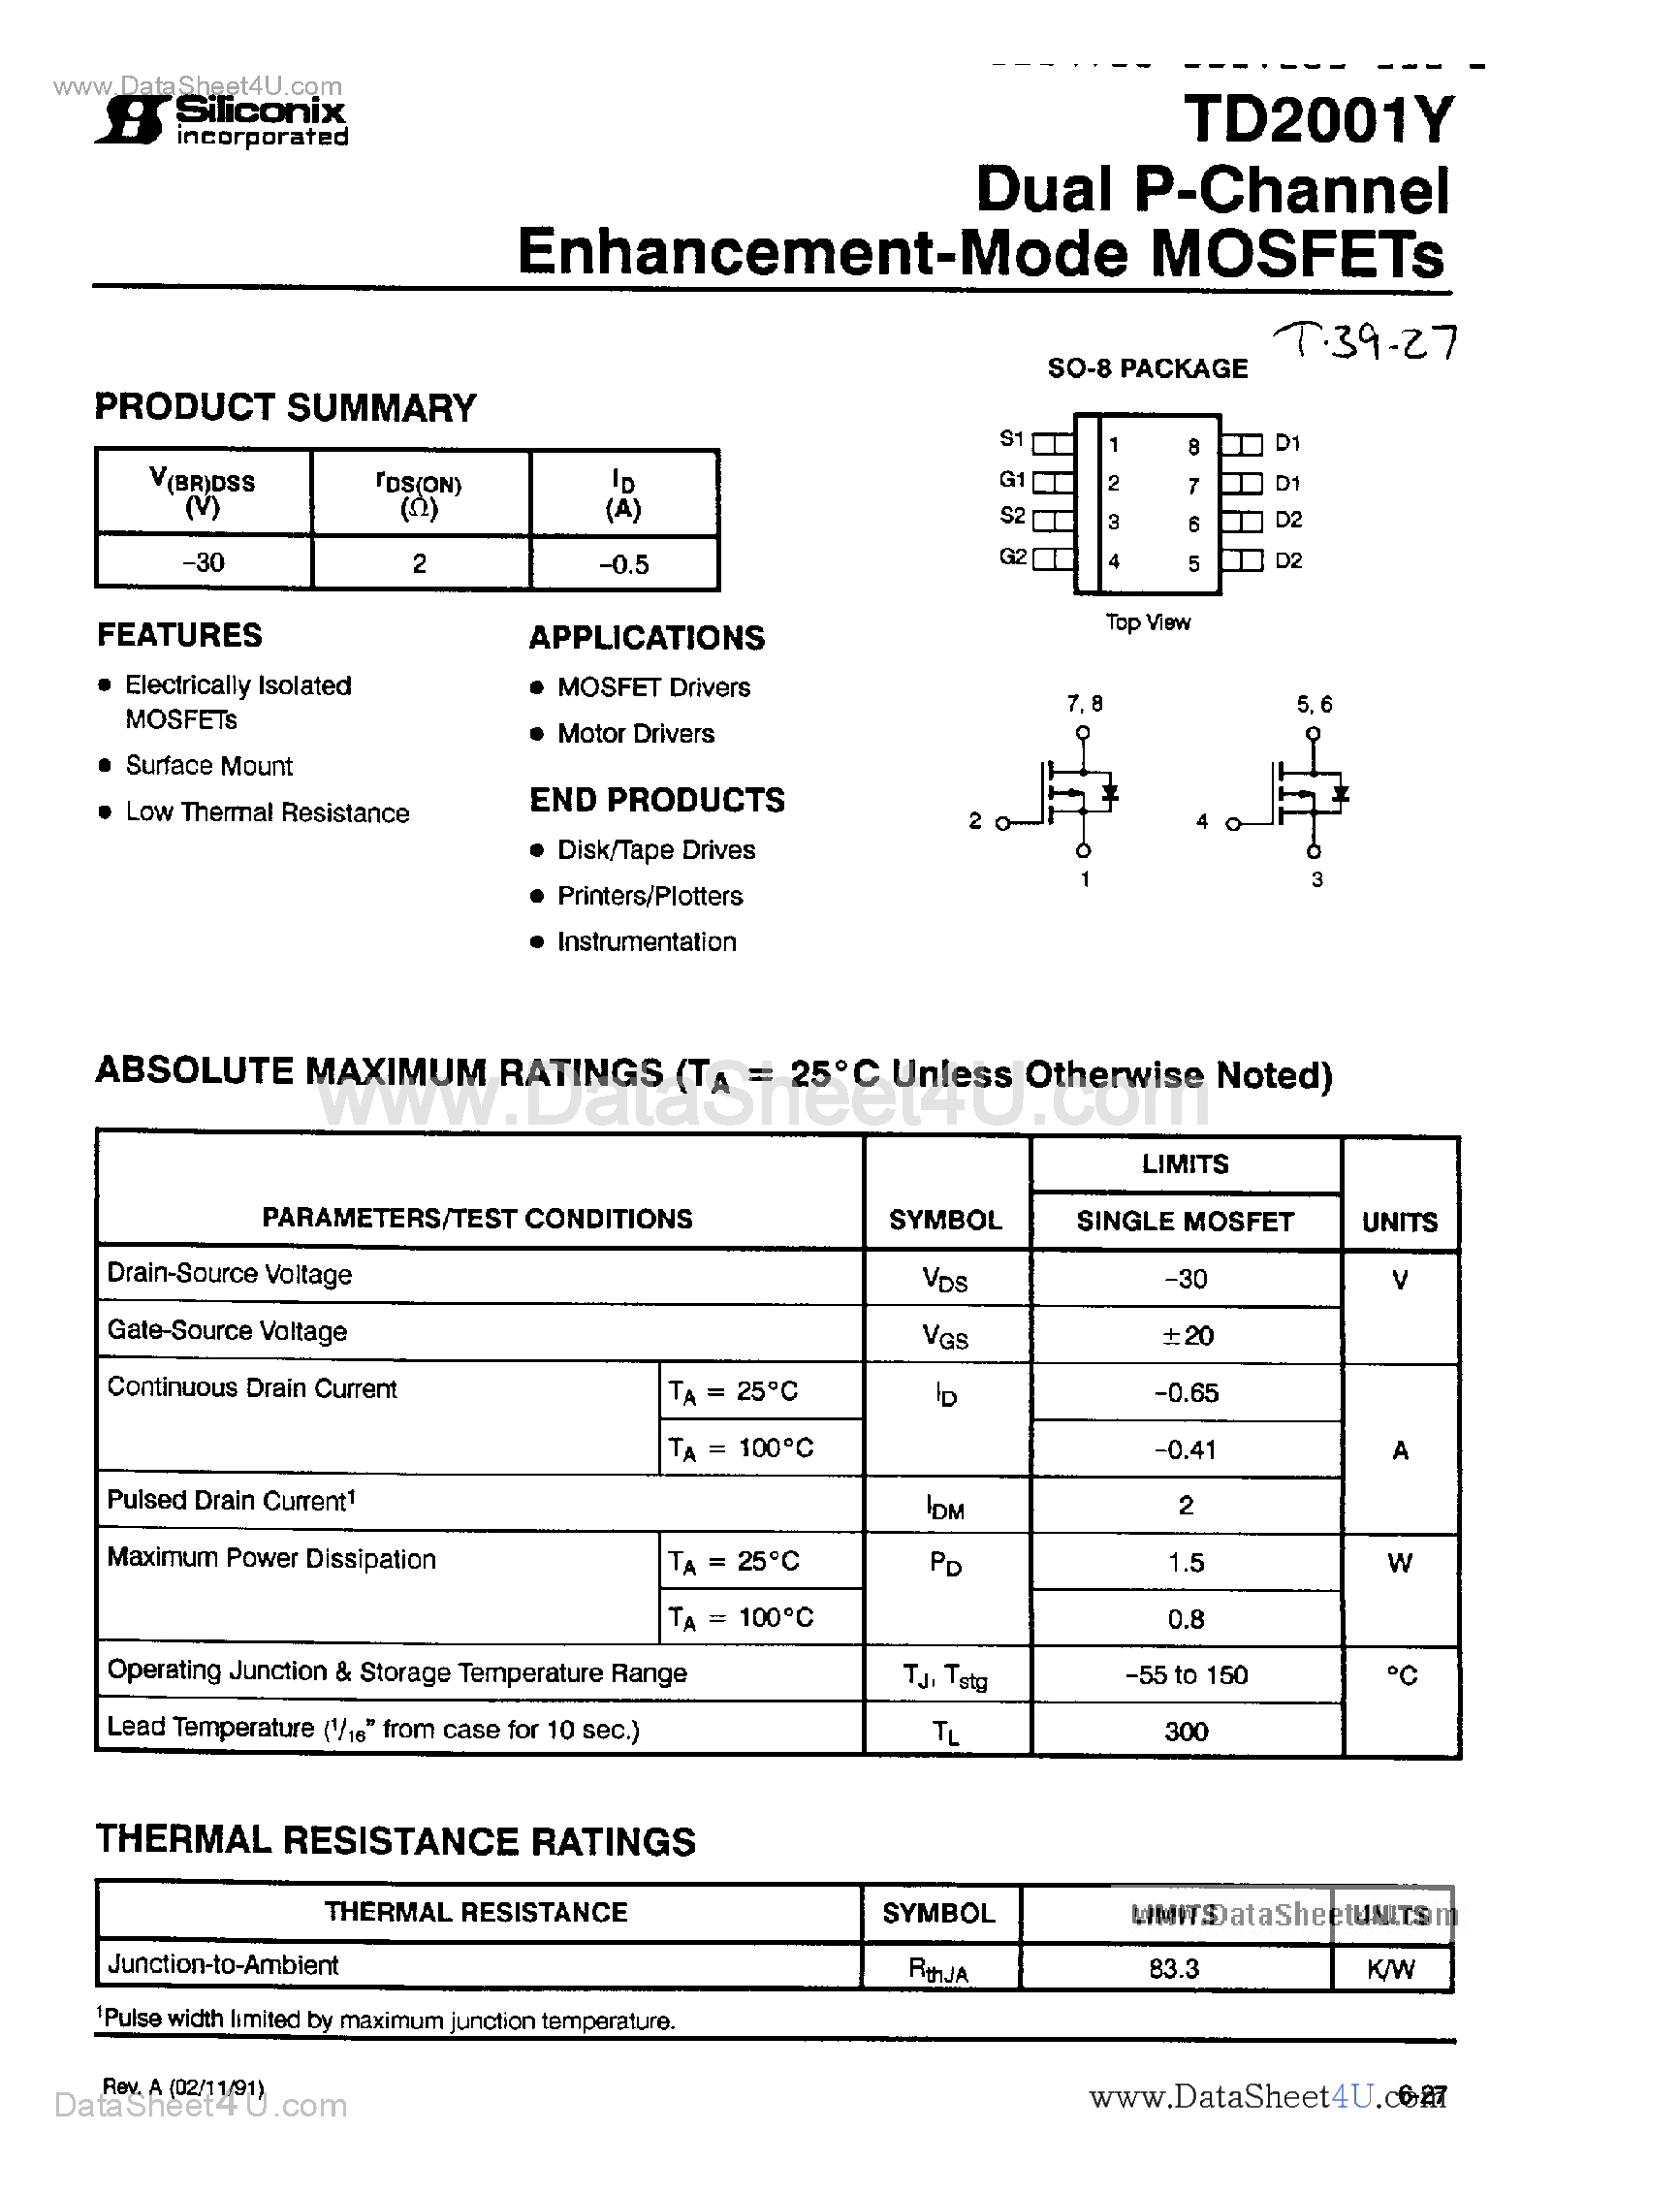 Datasheet TD2001Y - Dual P-Channel Enhancement Mode MOSFETs page 1